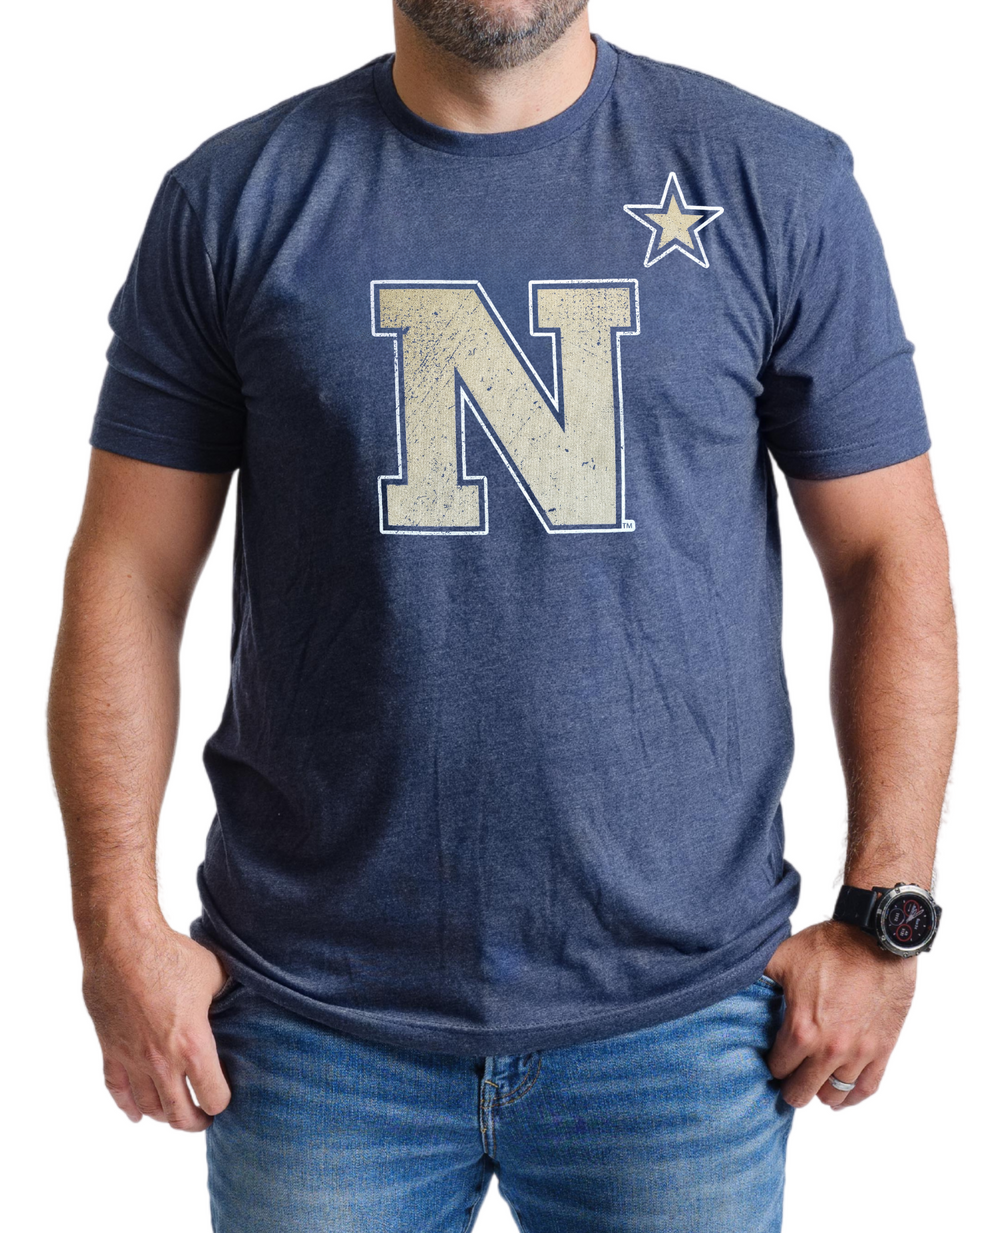 US Naval Academy Primary N* Navy Logo T-shirt on male model